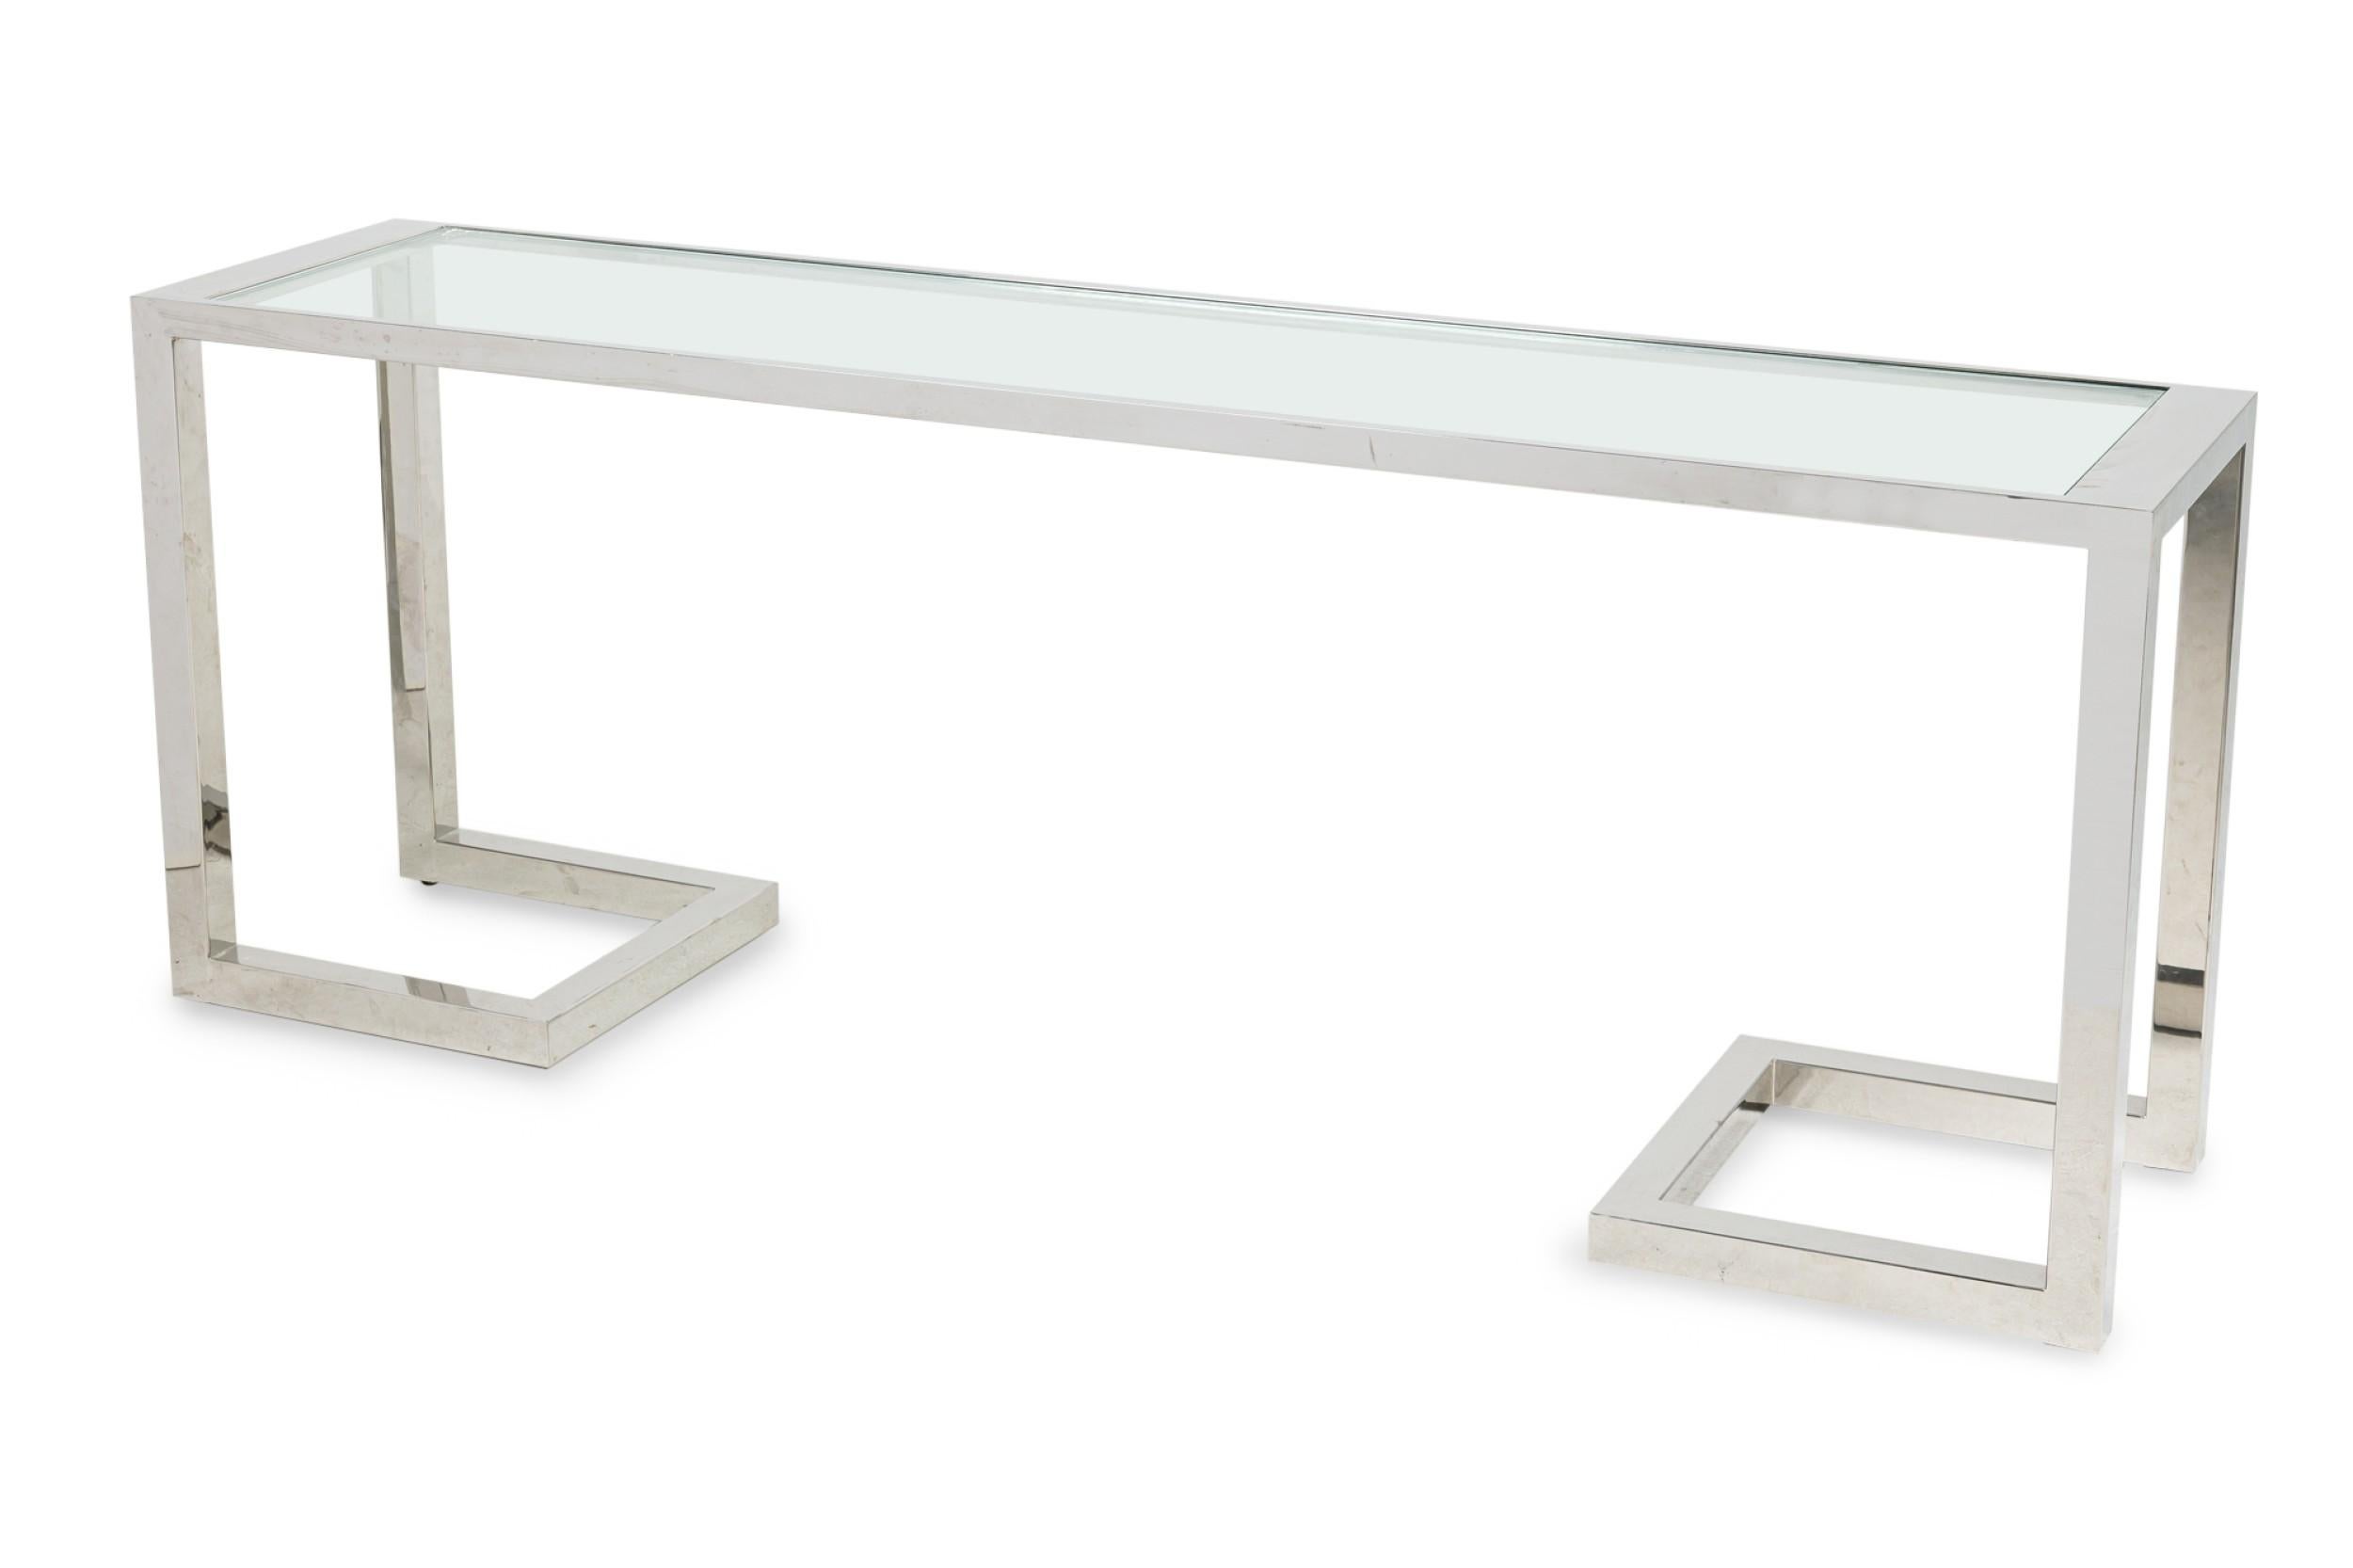 American Mid-Century Modern console table with an open polished chrome bracket form frame and having an inset glass top. (MILO BAUGHMAN)
 

 Condition Notes: